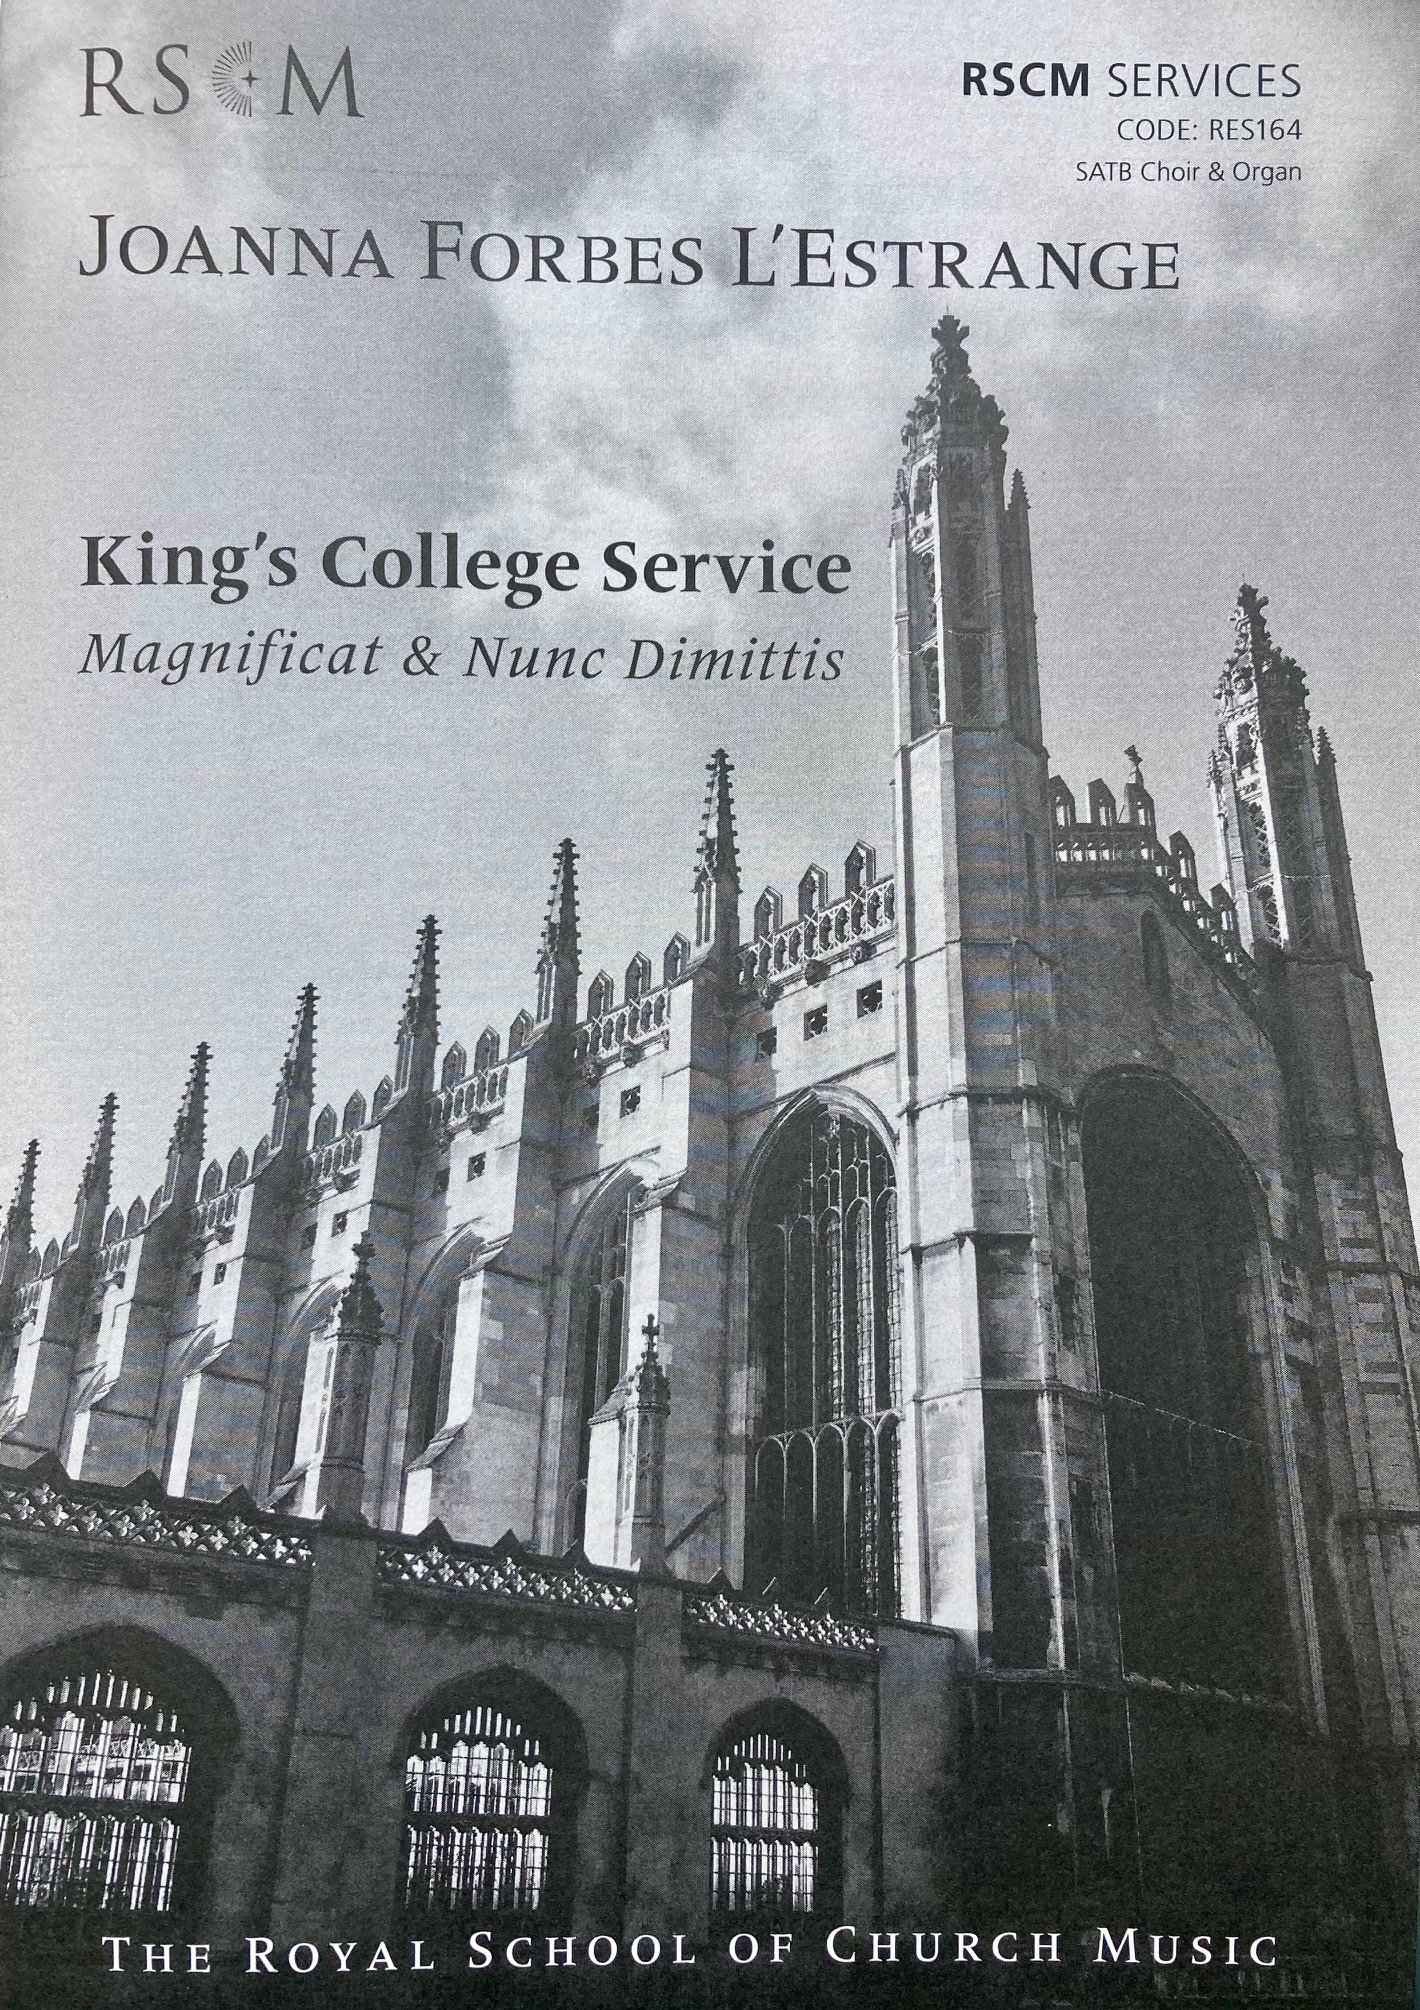 King's College Service COVER copy.jpg